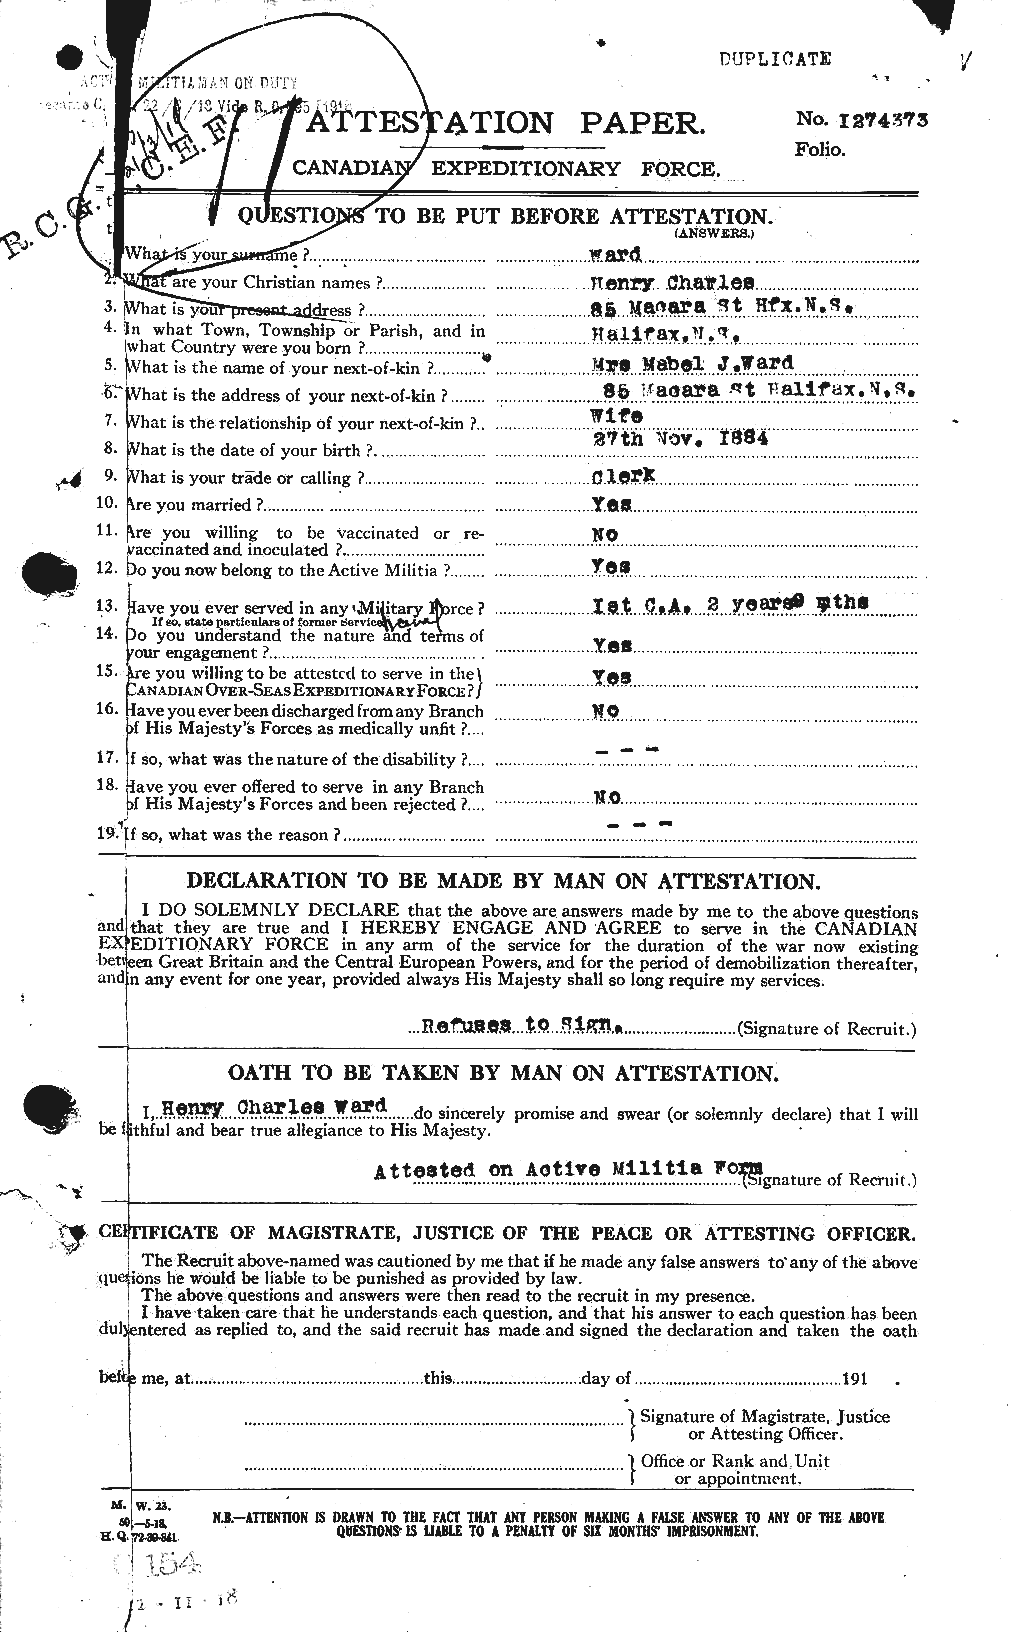 Personnel Records of the First World War - CEF 657831a